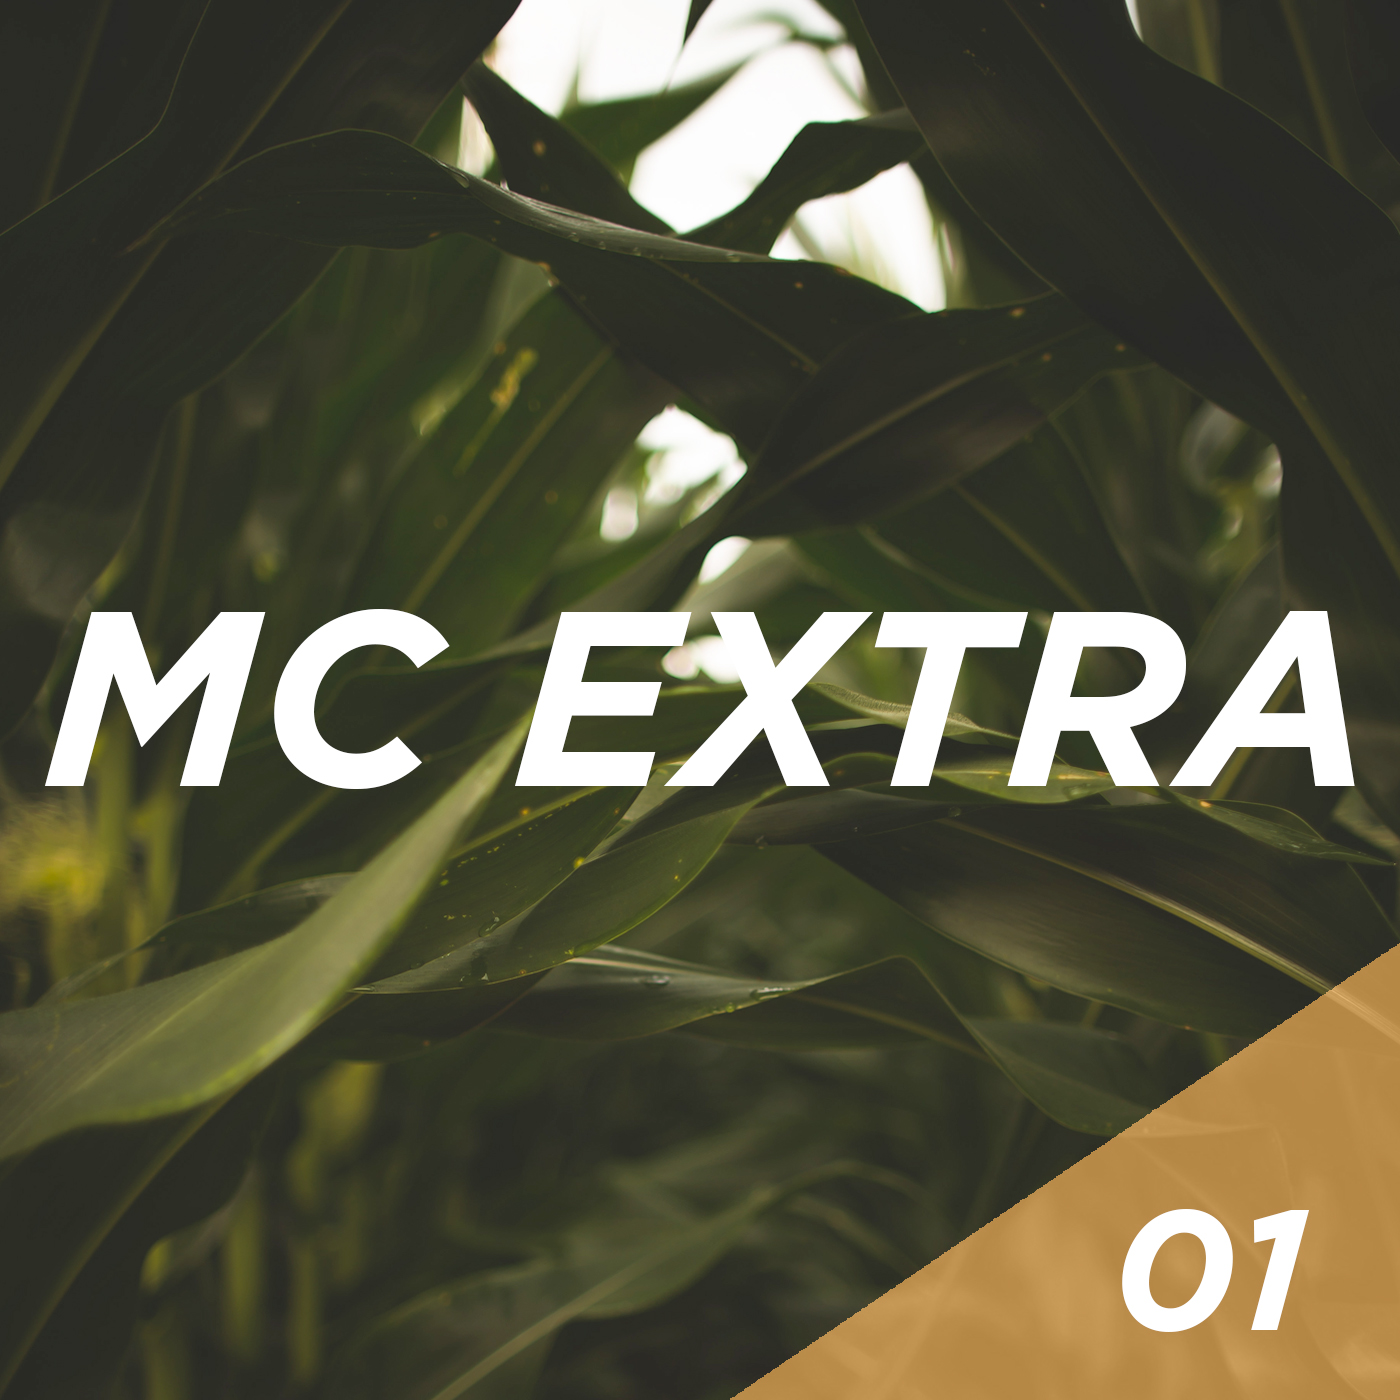 MC Podcast Extra: Flooding in the Midwest